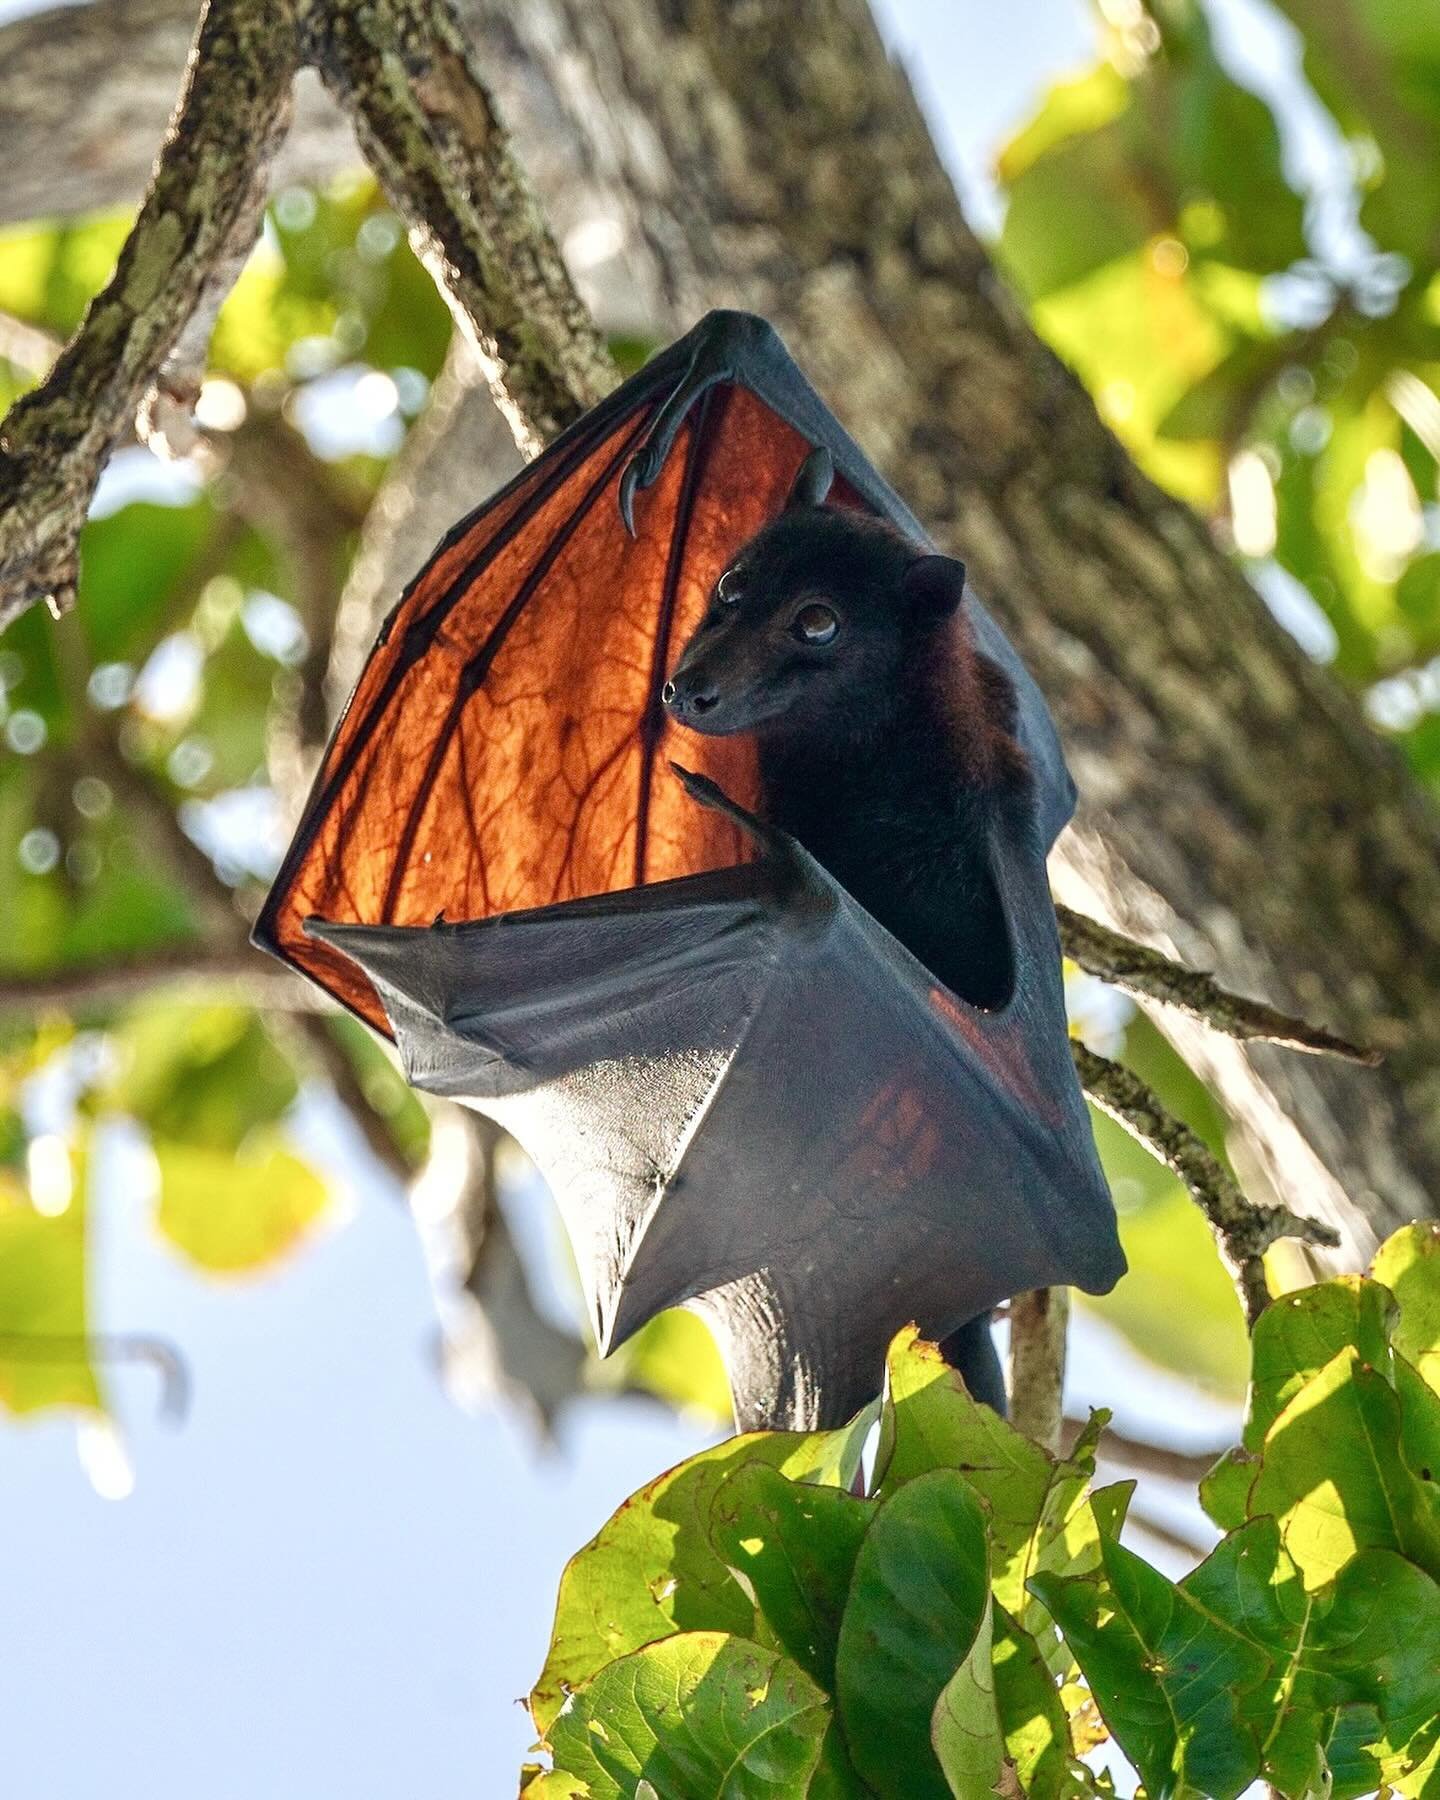 Can you believe people eat these black flying foxes? And nowhere do they have as much of an appetite for the megabat bushmeat as they do in North Sulawesi. Although the species in general is not endangered, flying foxes&rsquo; minimal reproduction nu